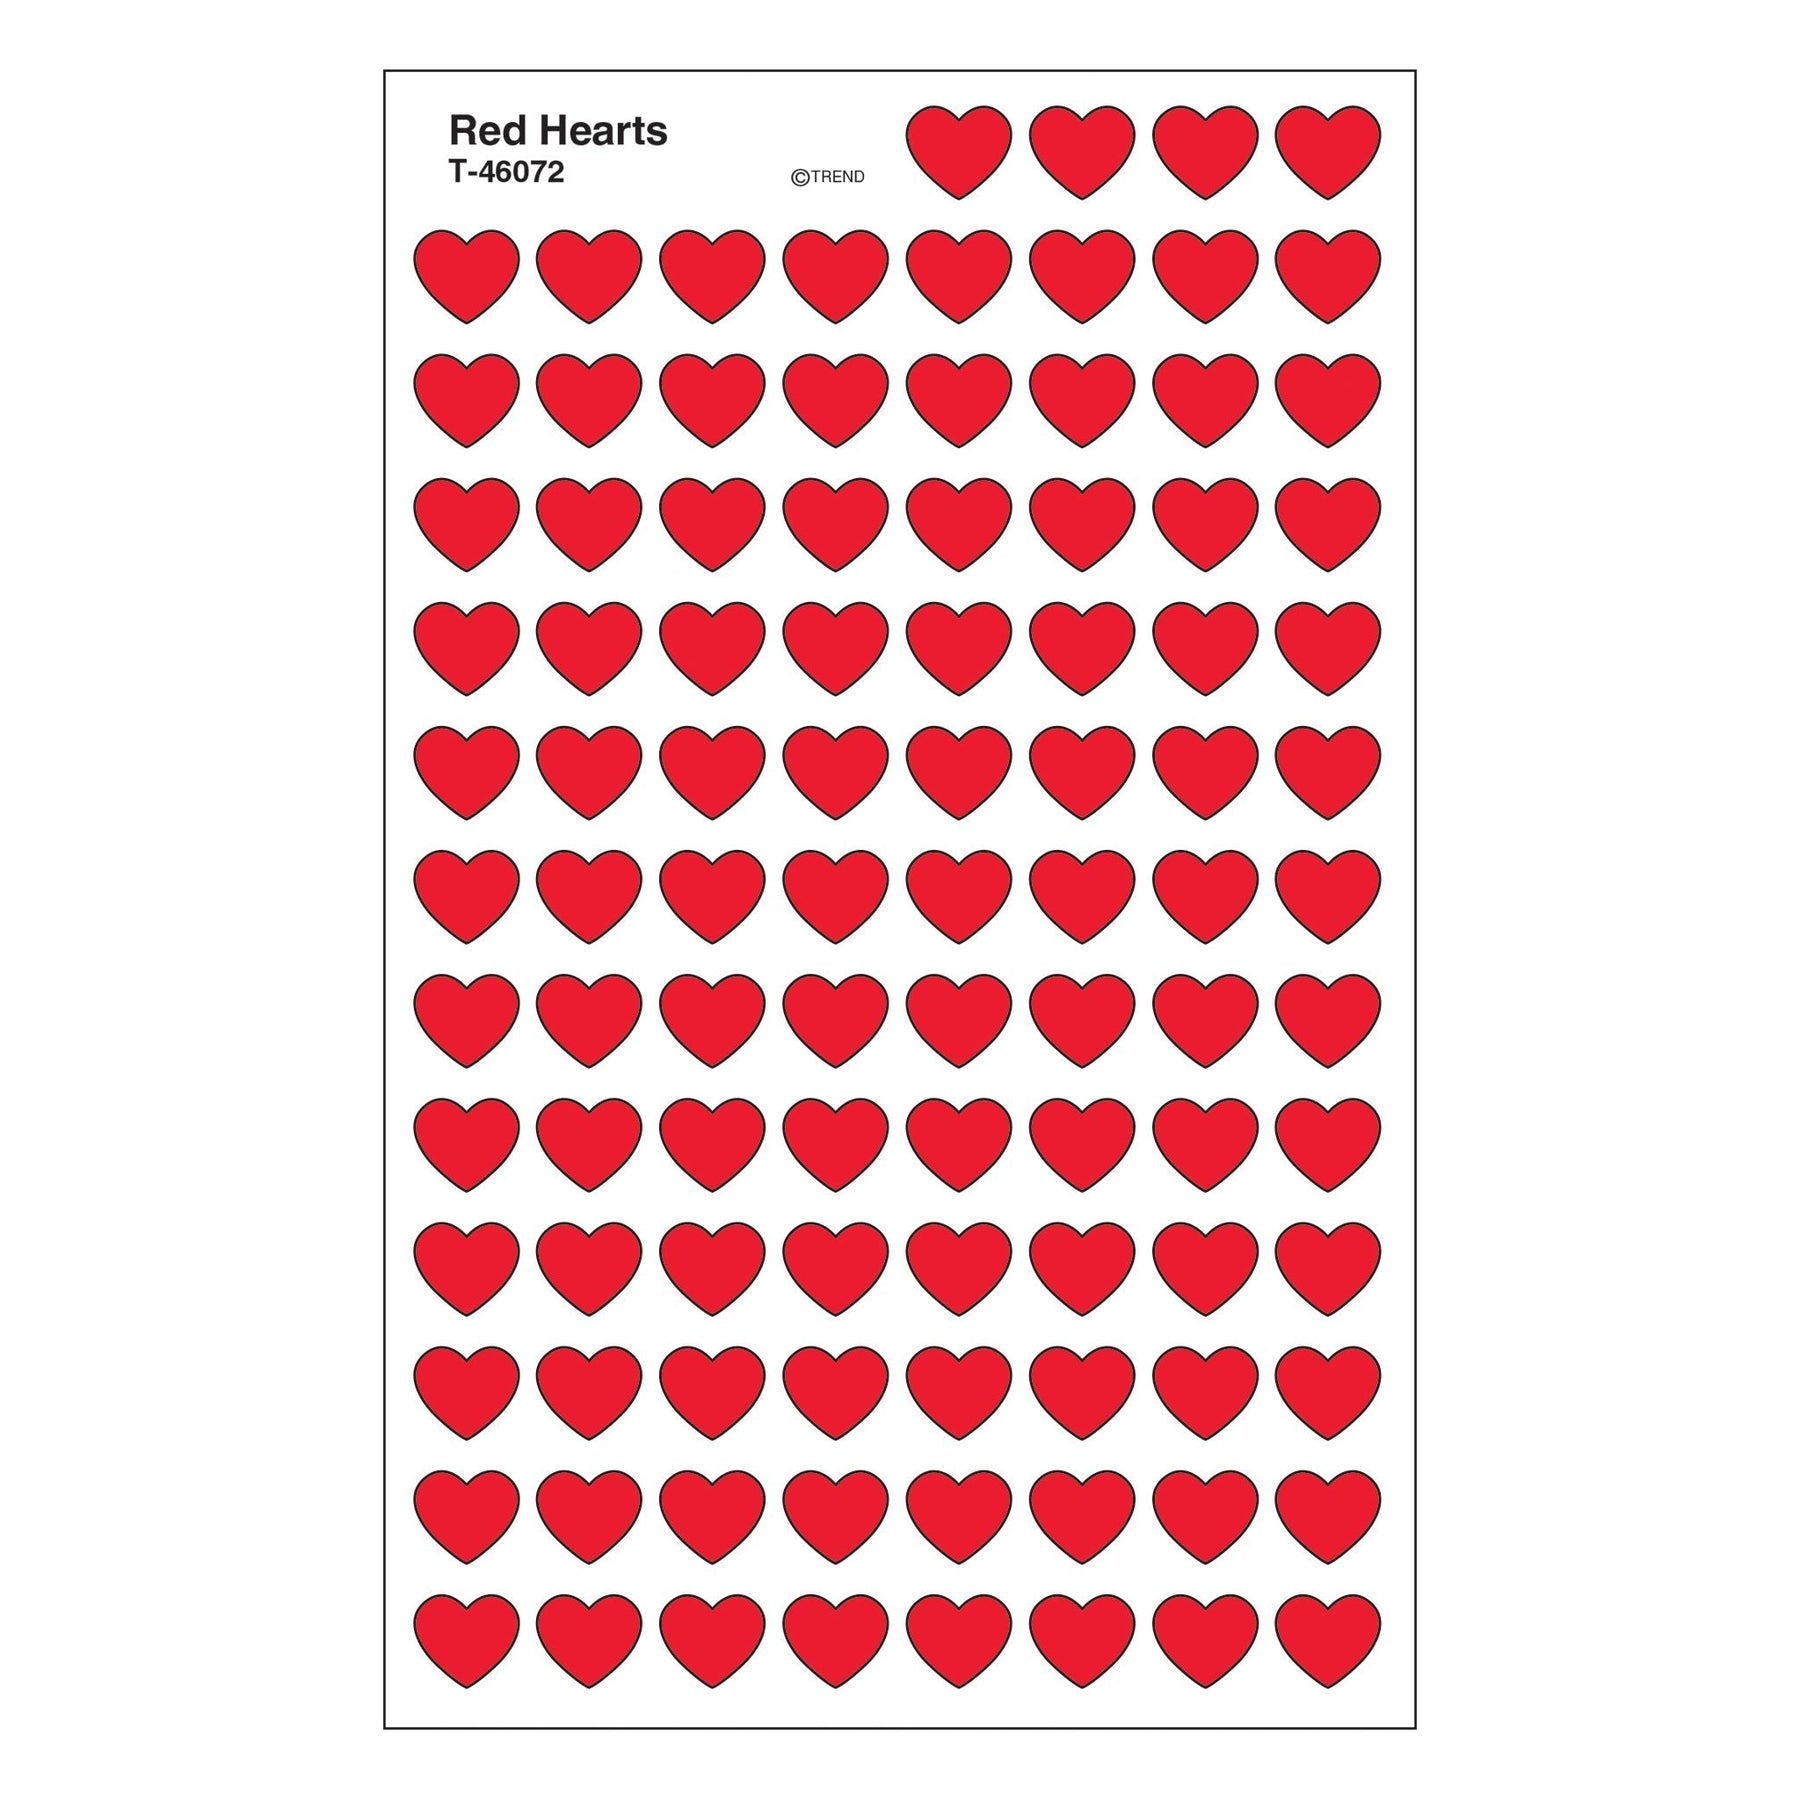 Trend Red Hearts superShapes Stickers (T 46072)